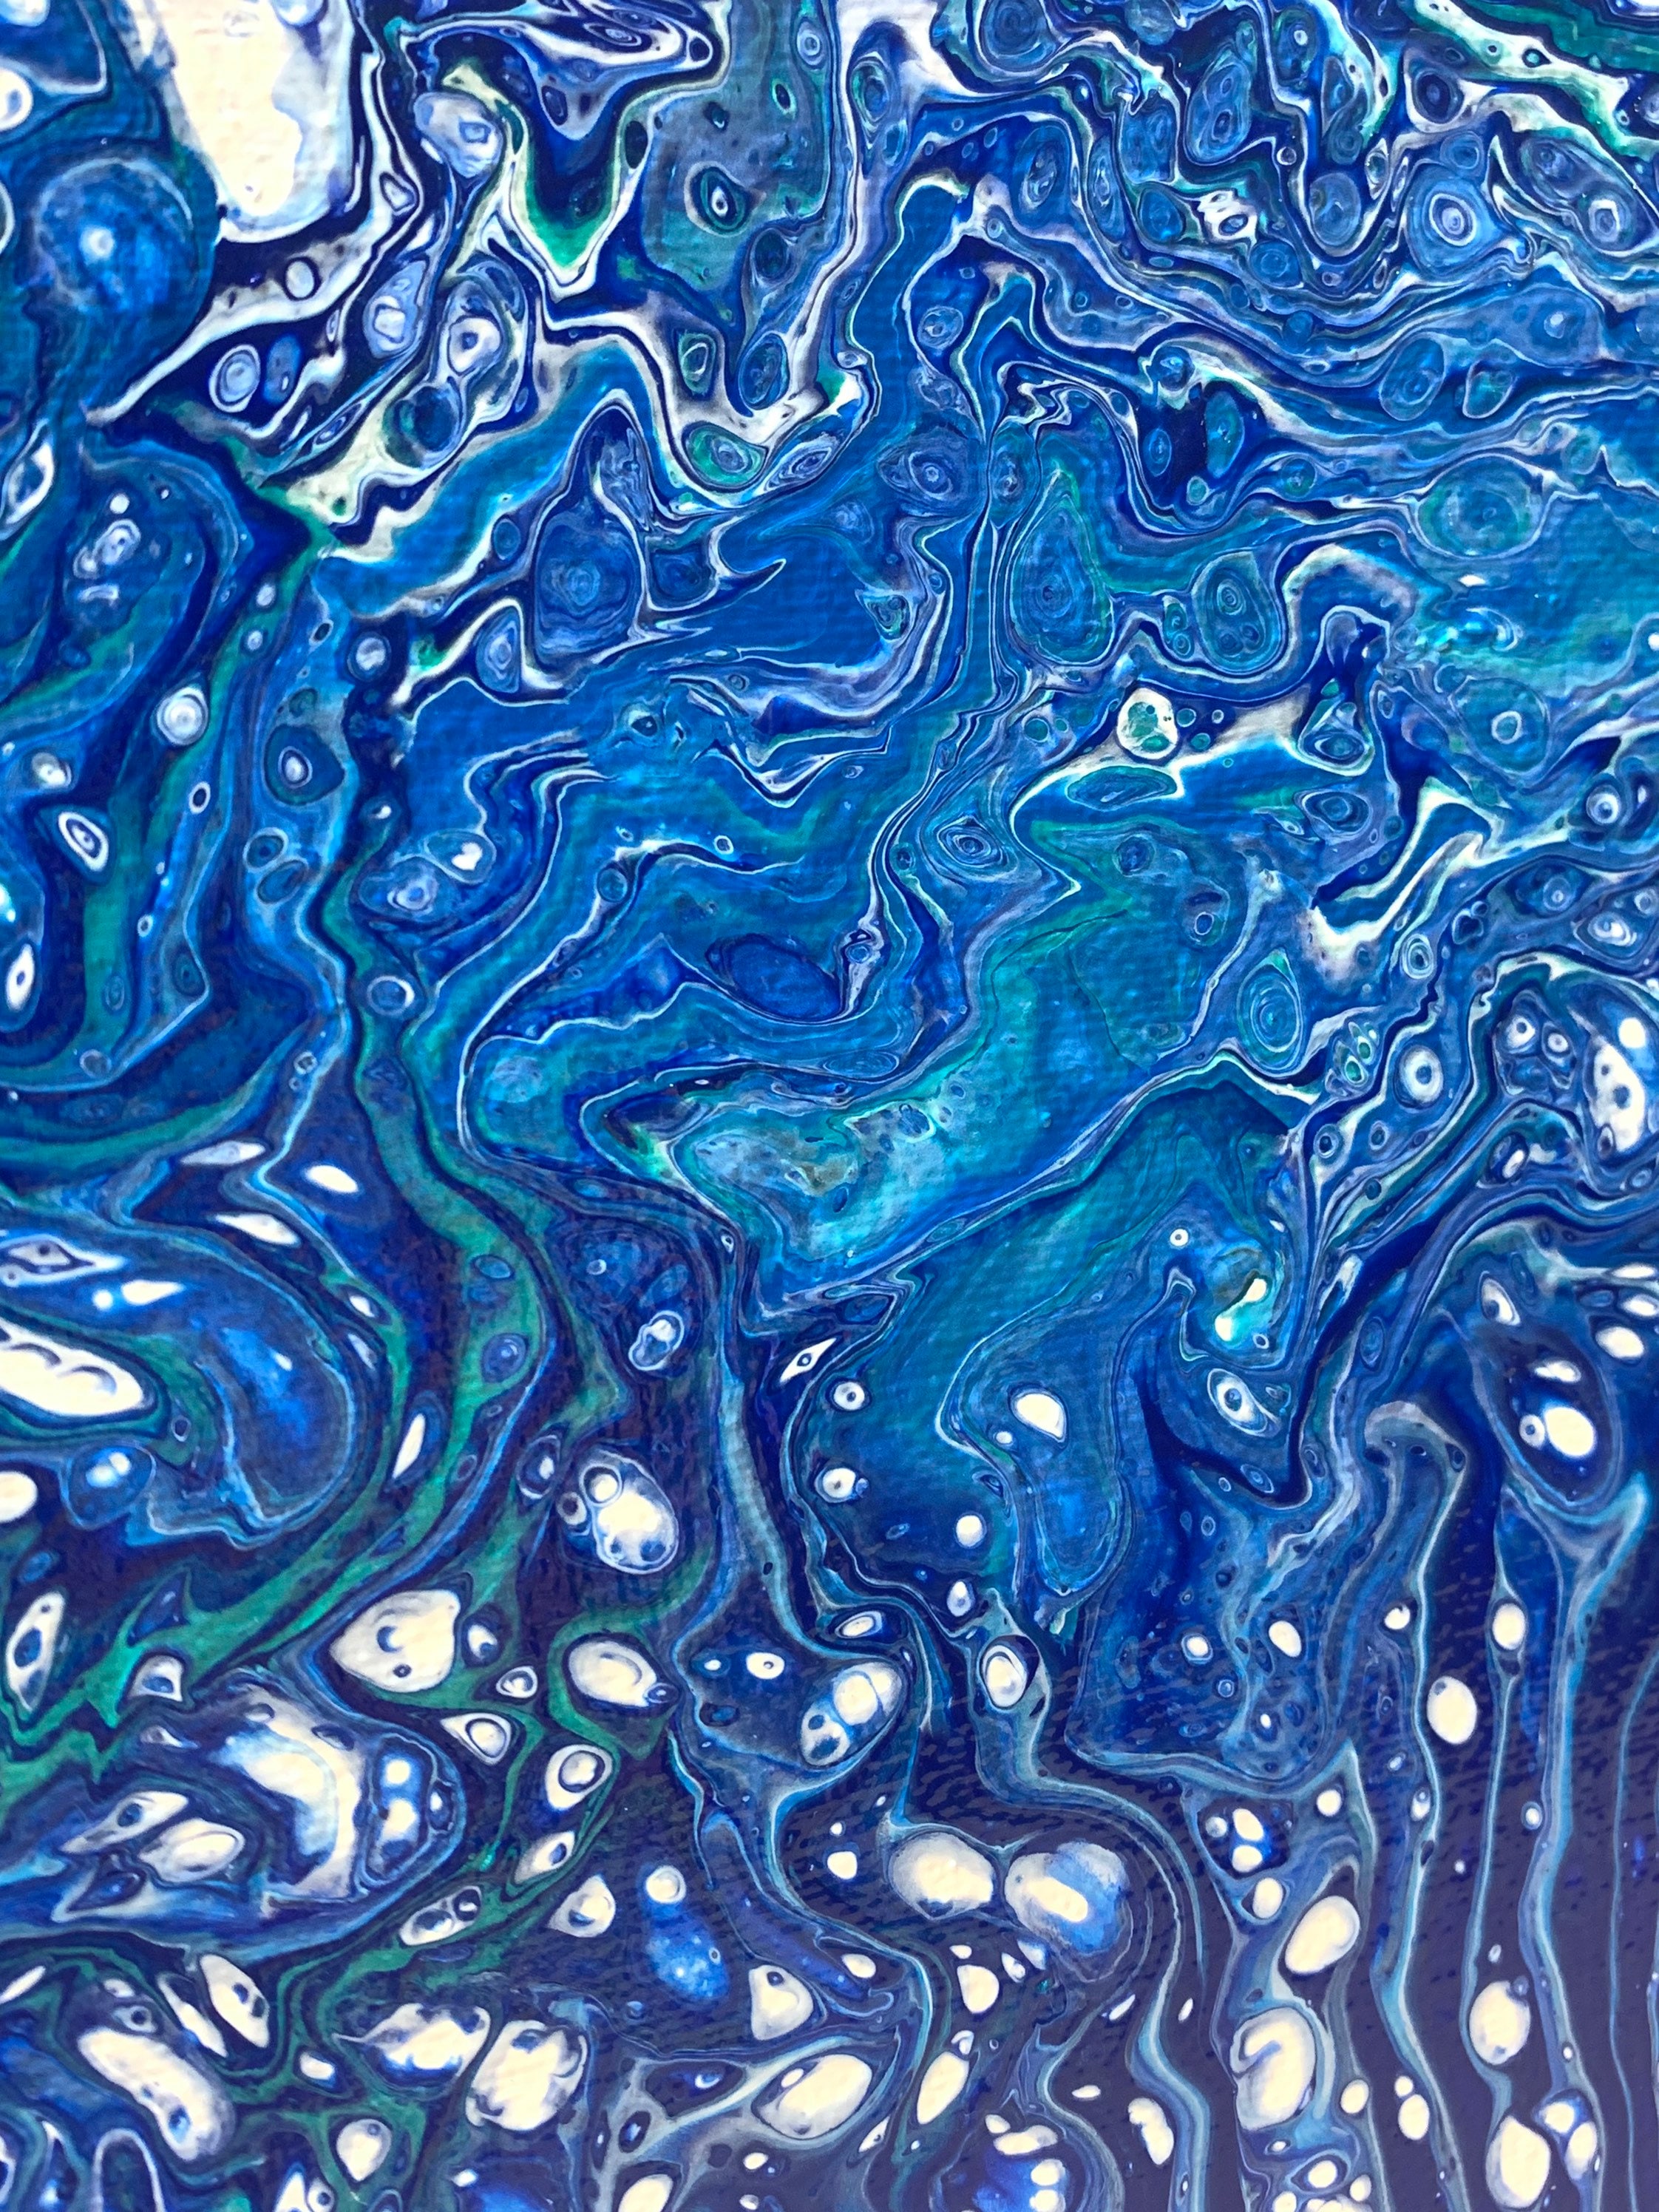 Acrylic Paint Pouring, Paint + Floetrol Pack in Turquoise + Surf Blue